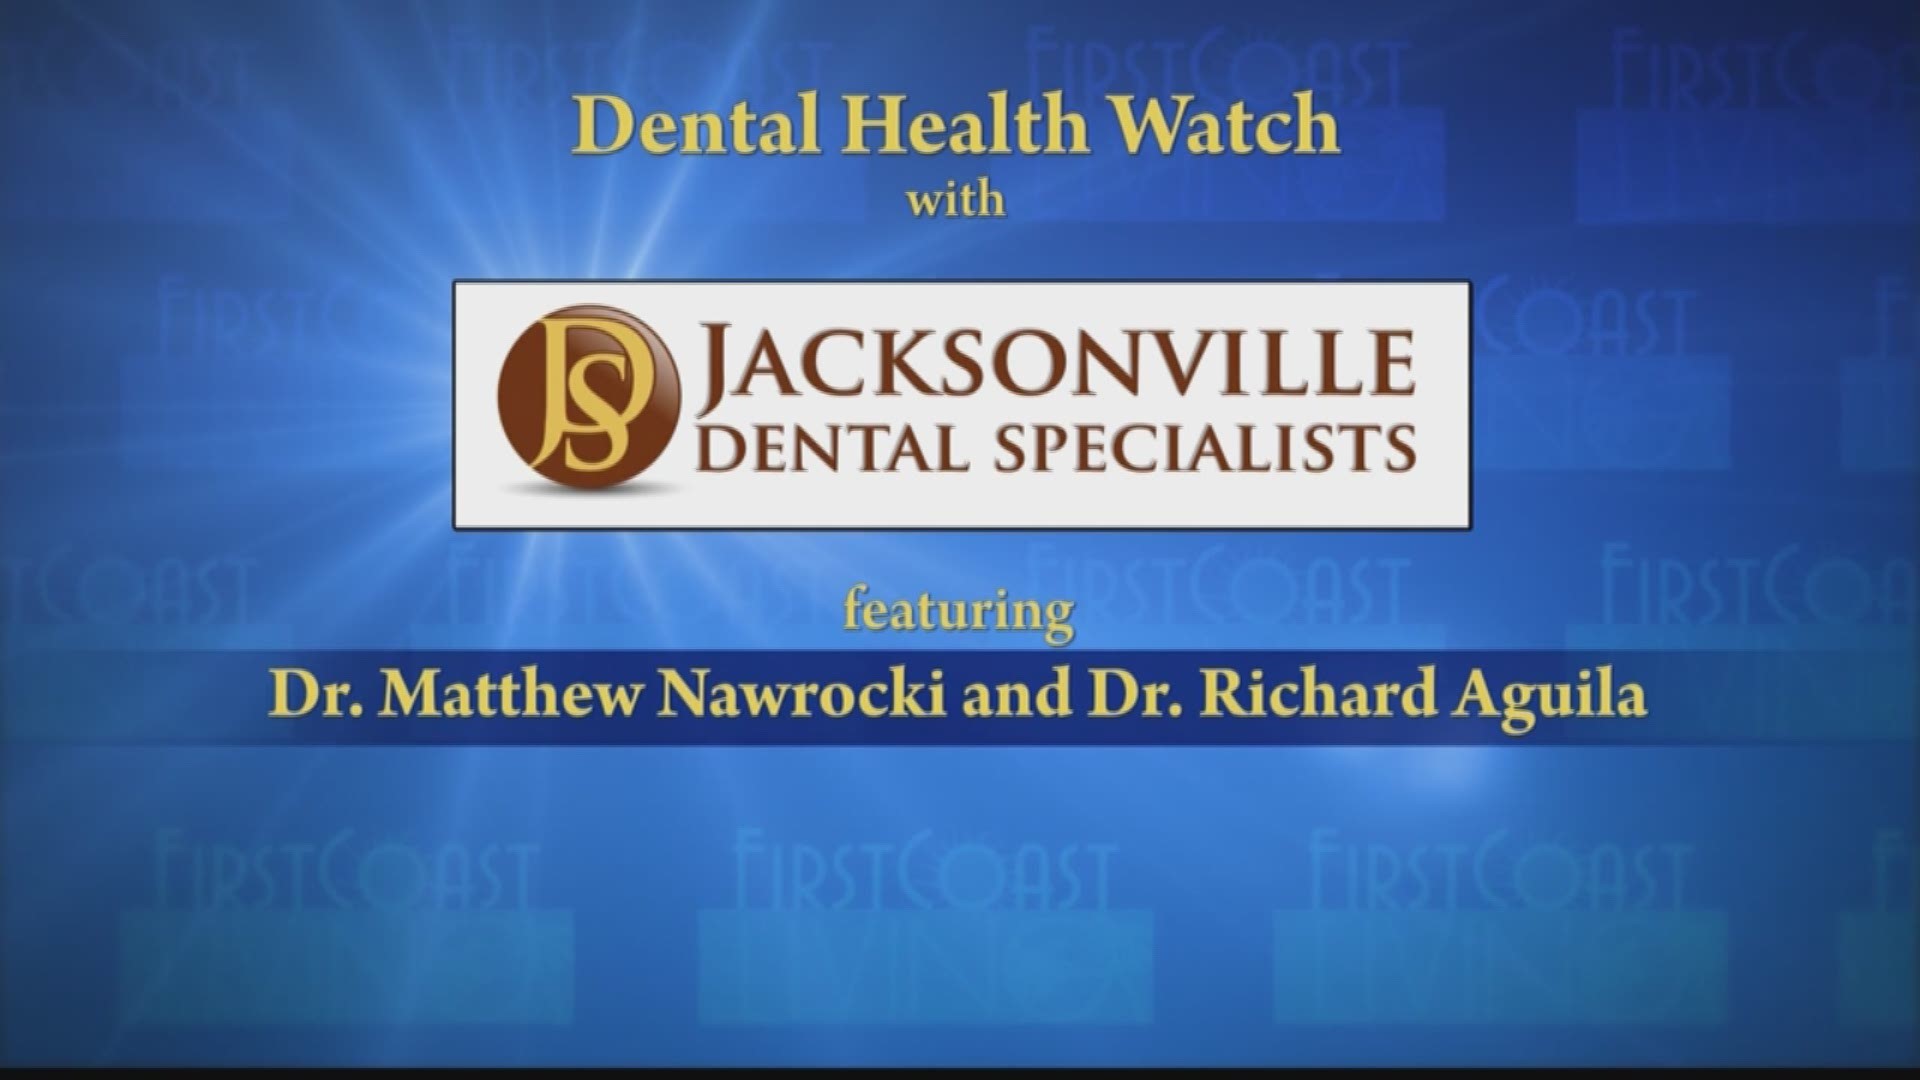 Dr, Aguila stops by to talk about Fixing Dental Issues